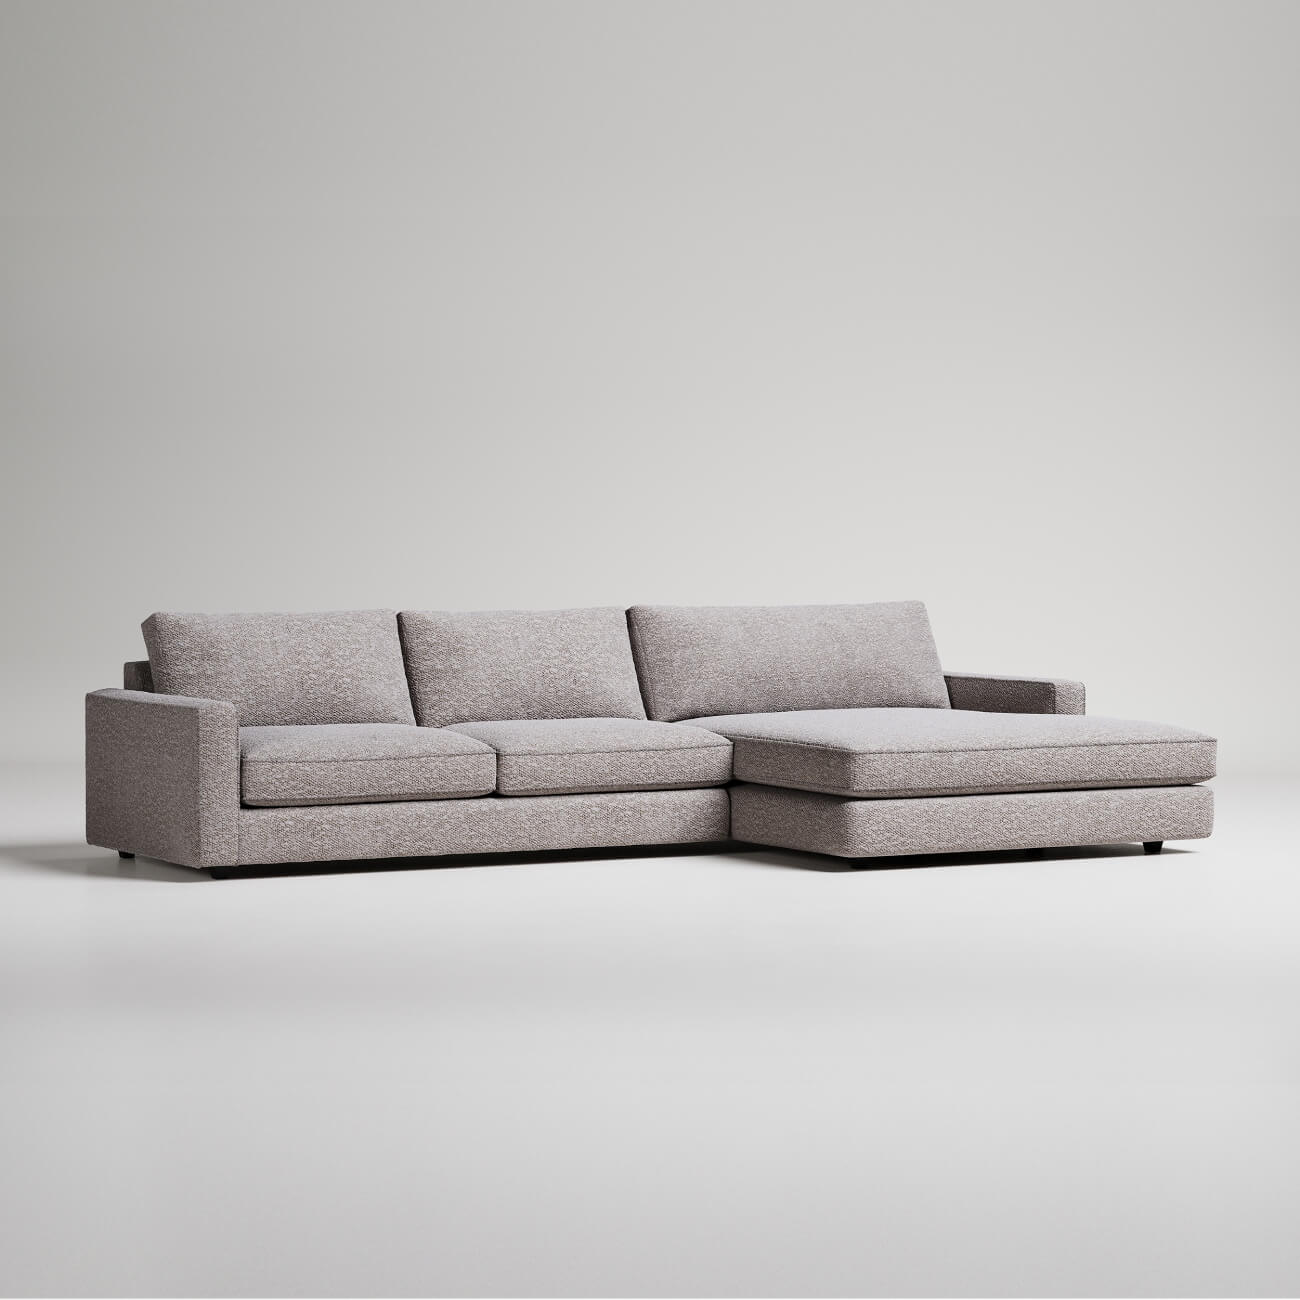 Grey sofa with two seat cushions and a large chaise